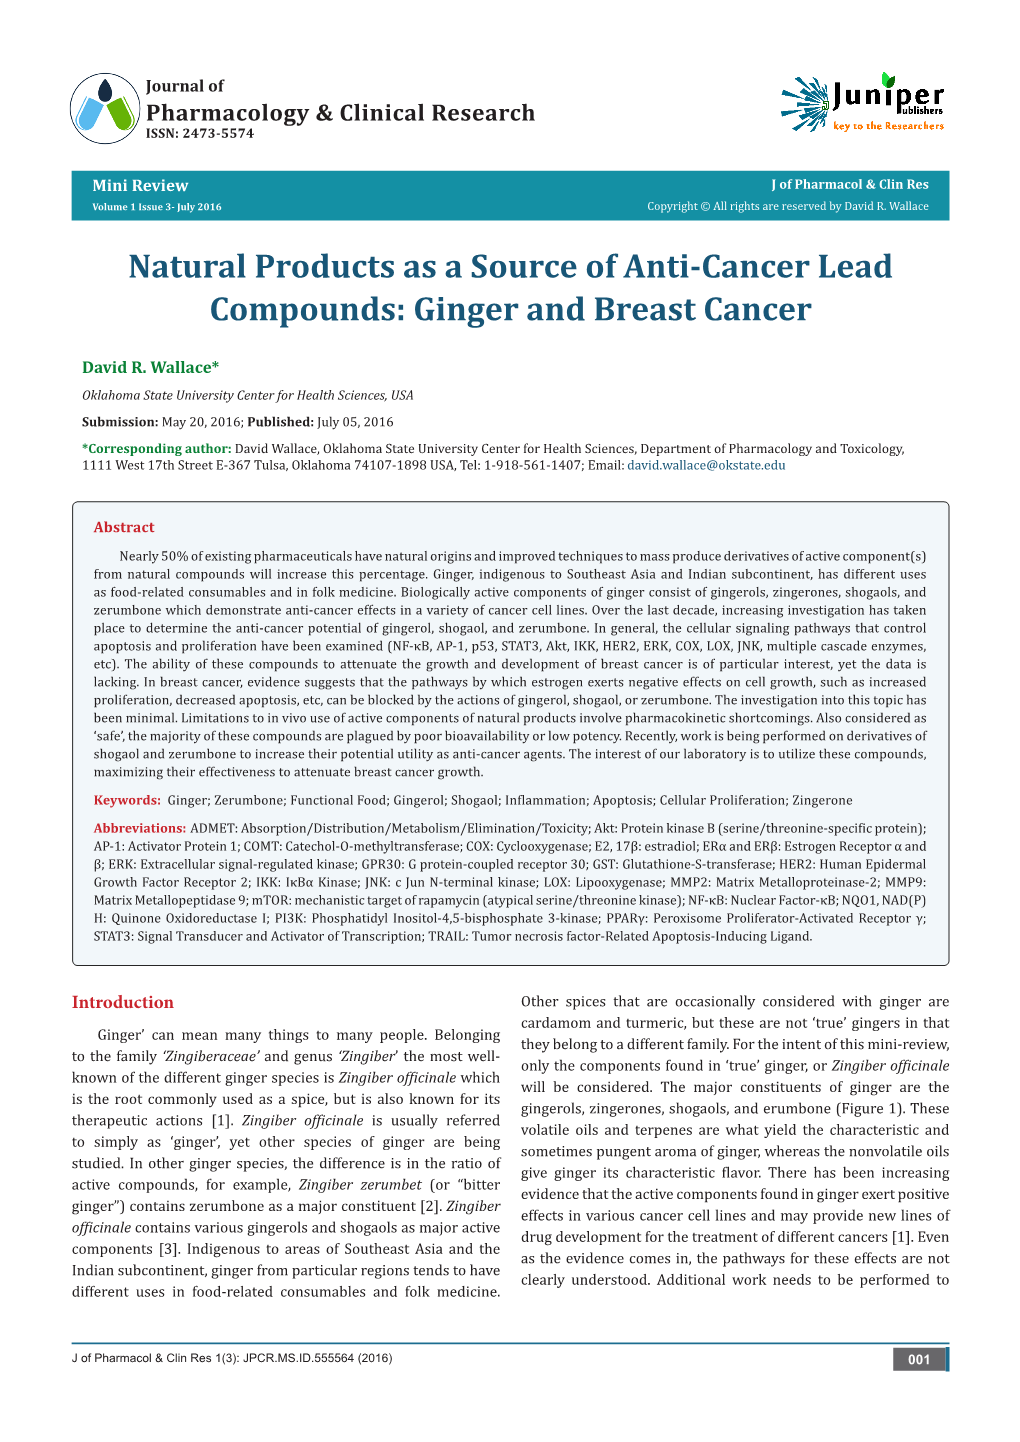 Natural Products As a Source of Anti-Cancer Lead Compounds: Ginger and Breast Cancer